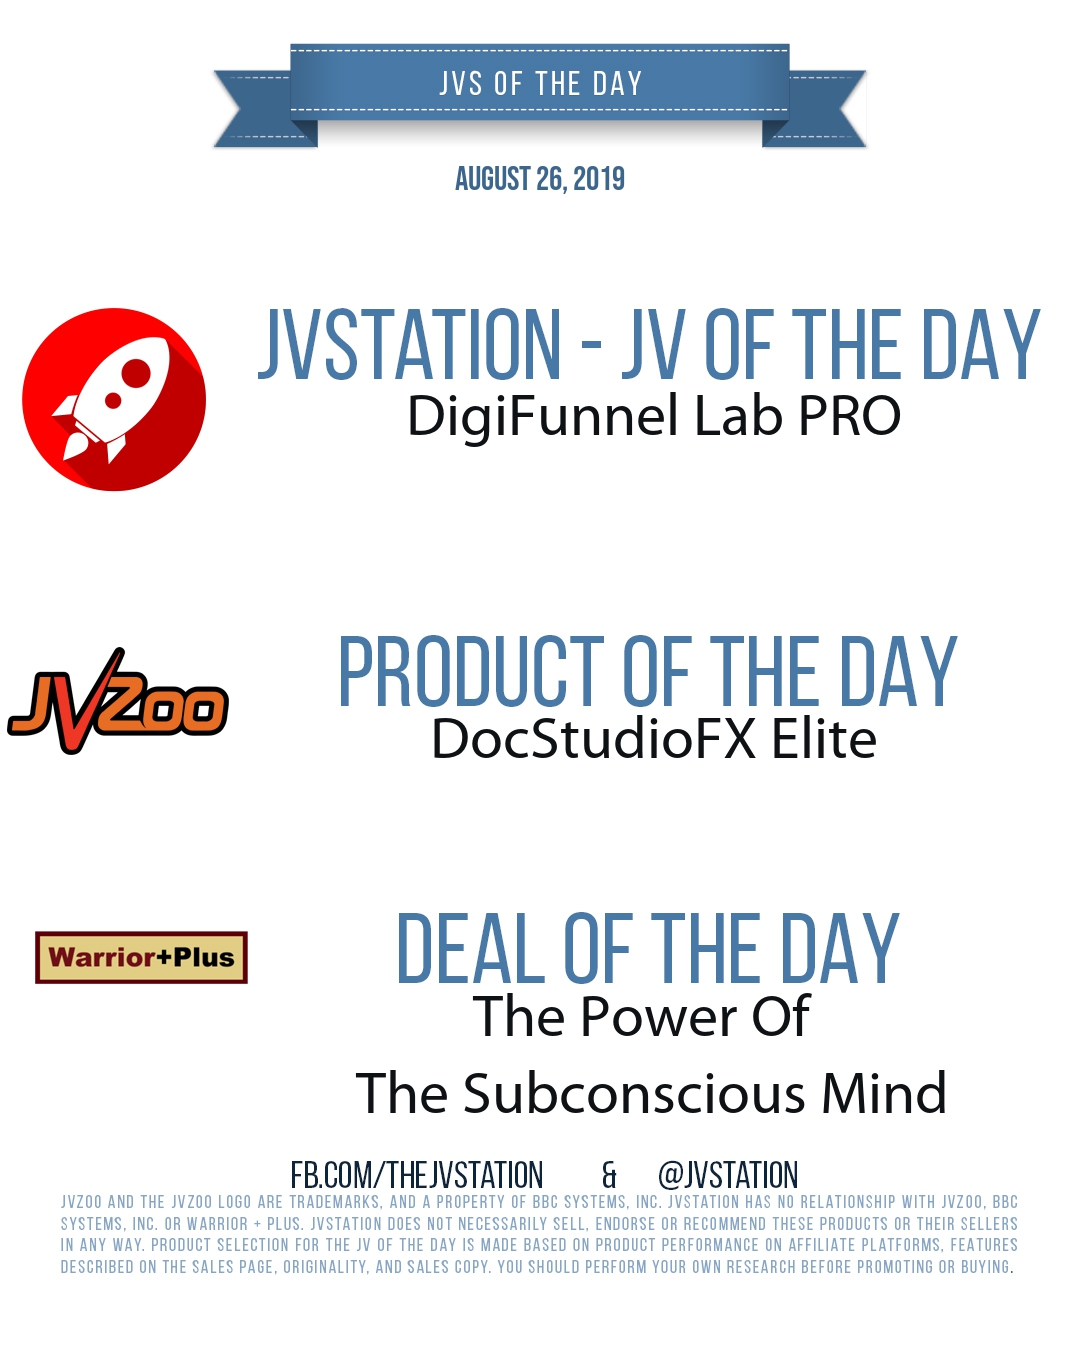 JVs of the day - August 26, 2019